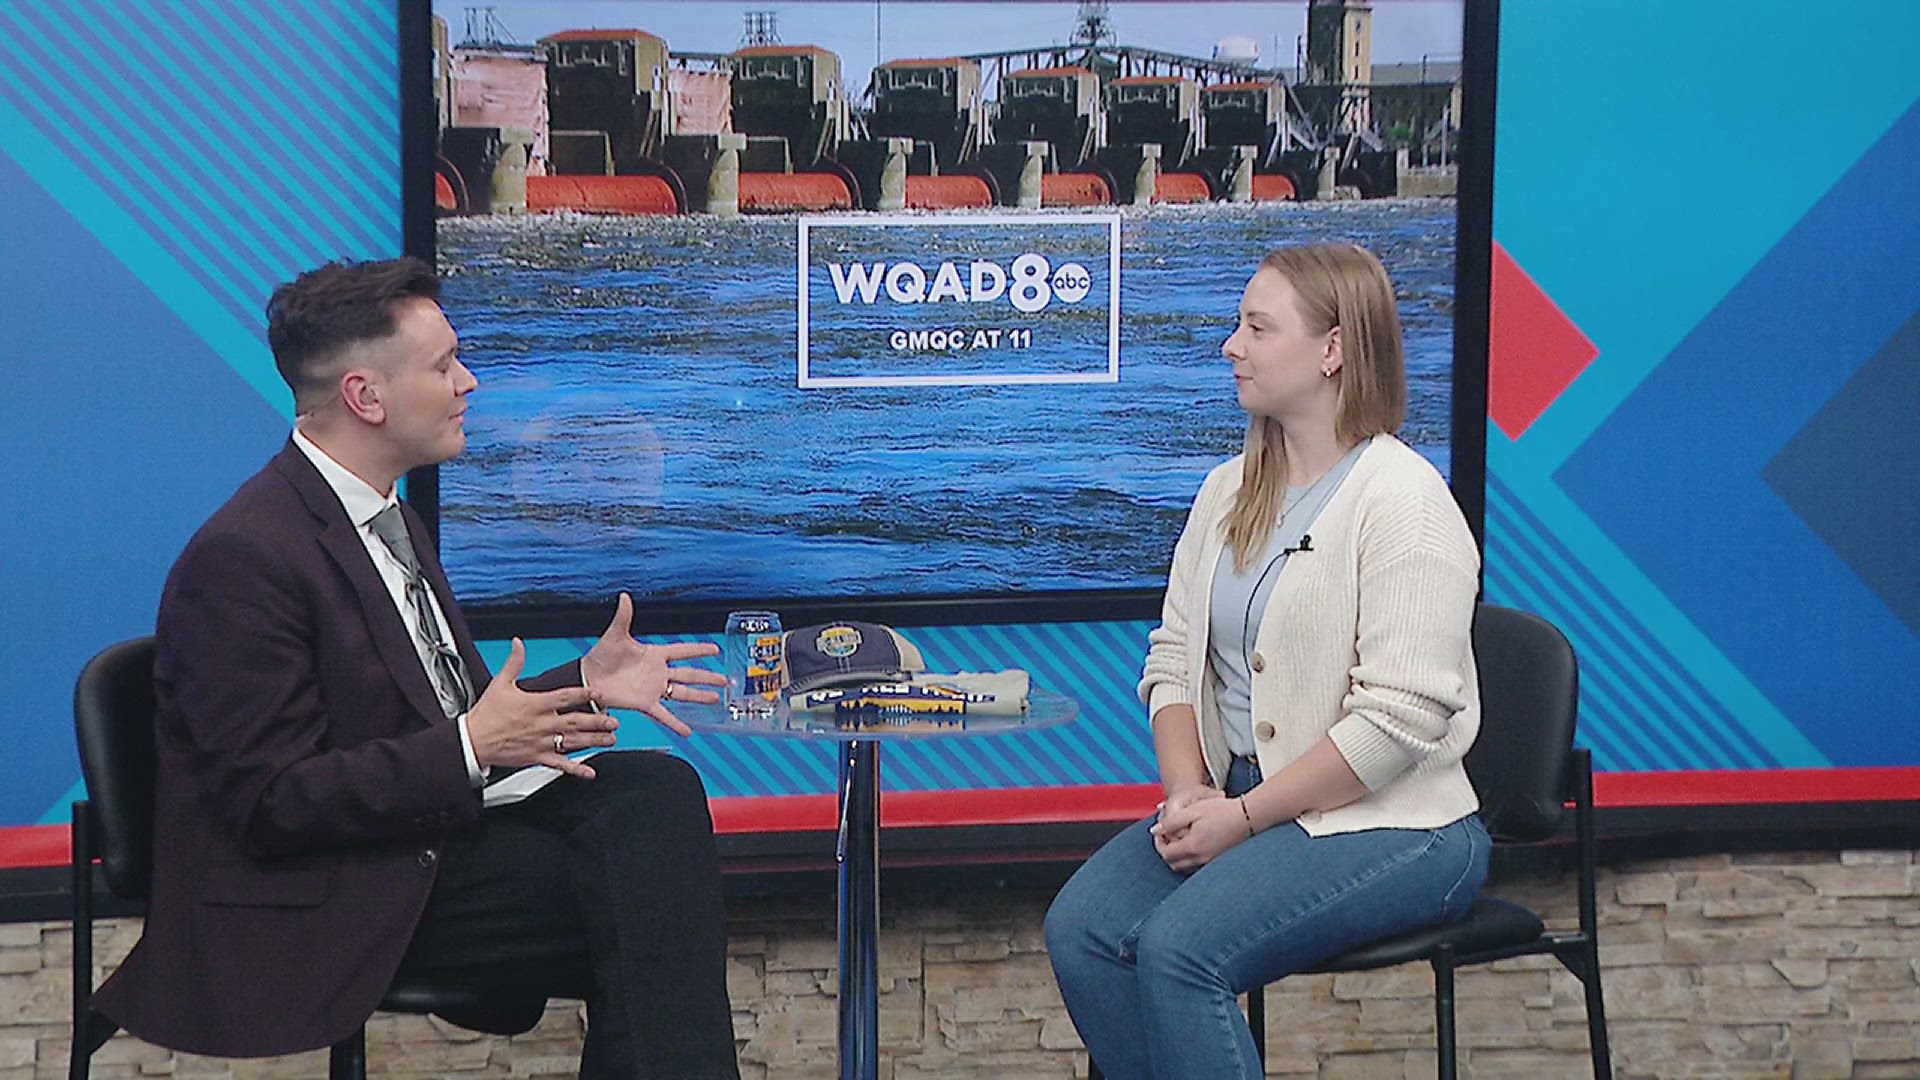 News 8's David Bohlman sits down with Lindsey Rowe to talk about the QC Craft Beer Week and what people can expect from it.